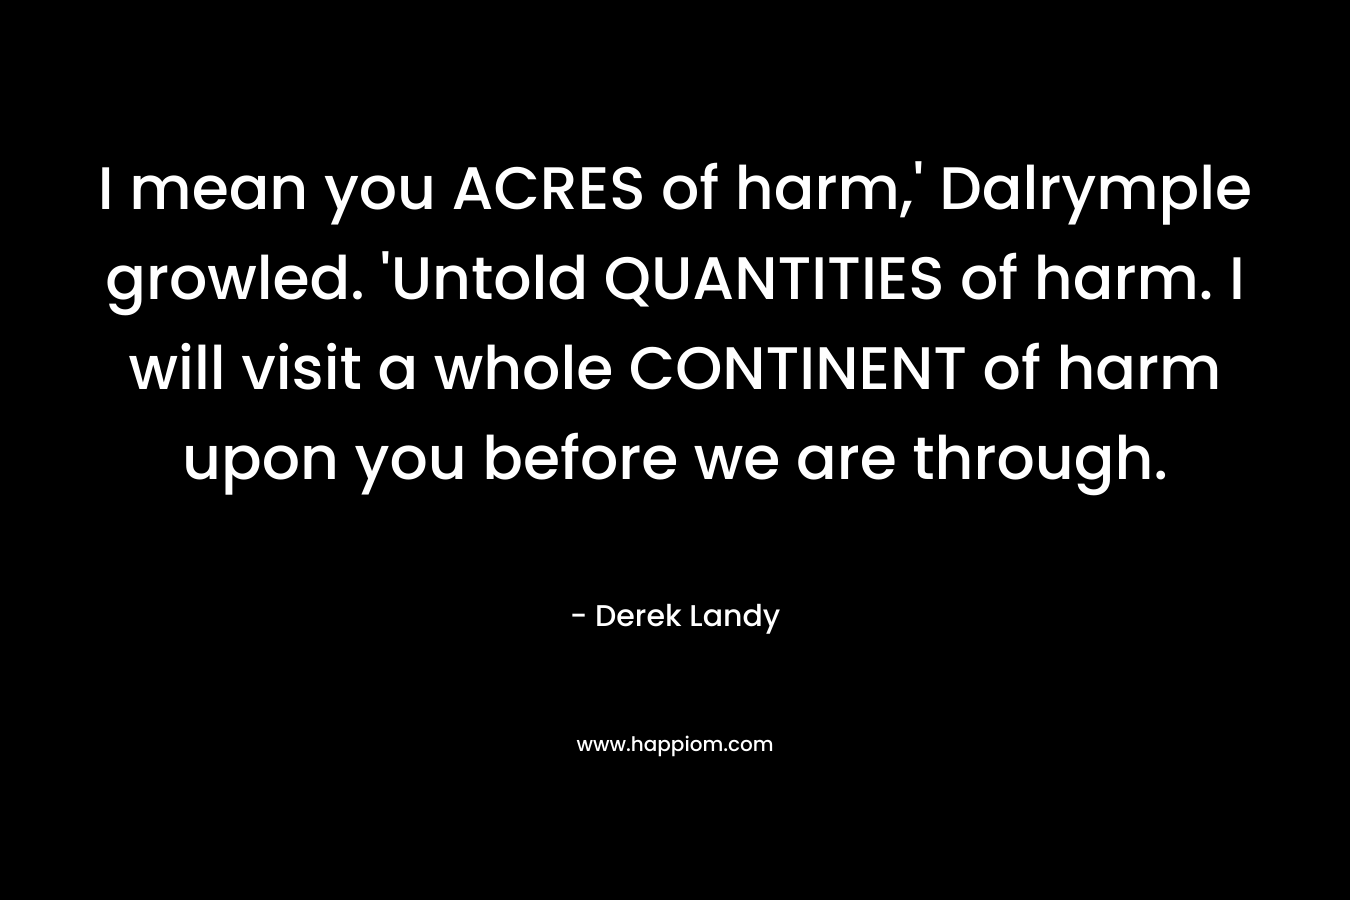 I mean you ACRES of harm,’ Dalrymple growled. ‘Untold QUANTITIES of harm. I will visit a whole CONTINENT of harm upon you before we are through. – Derek Landy